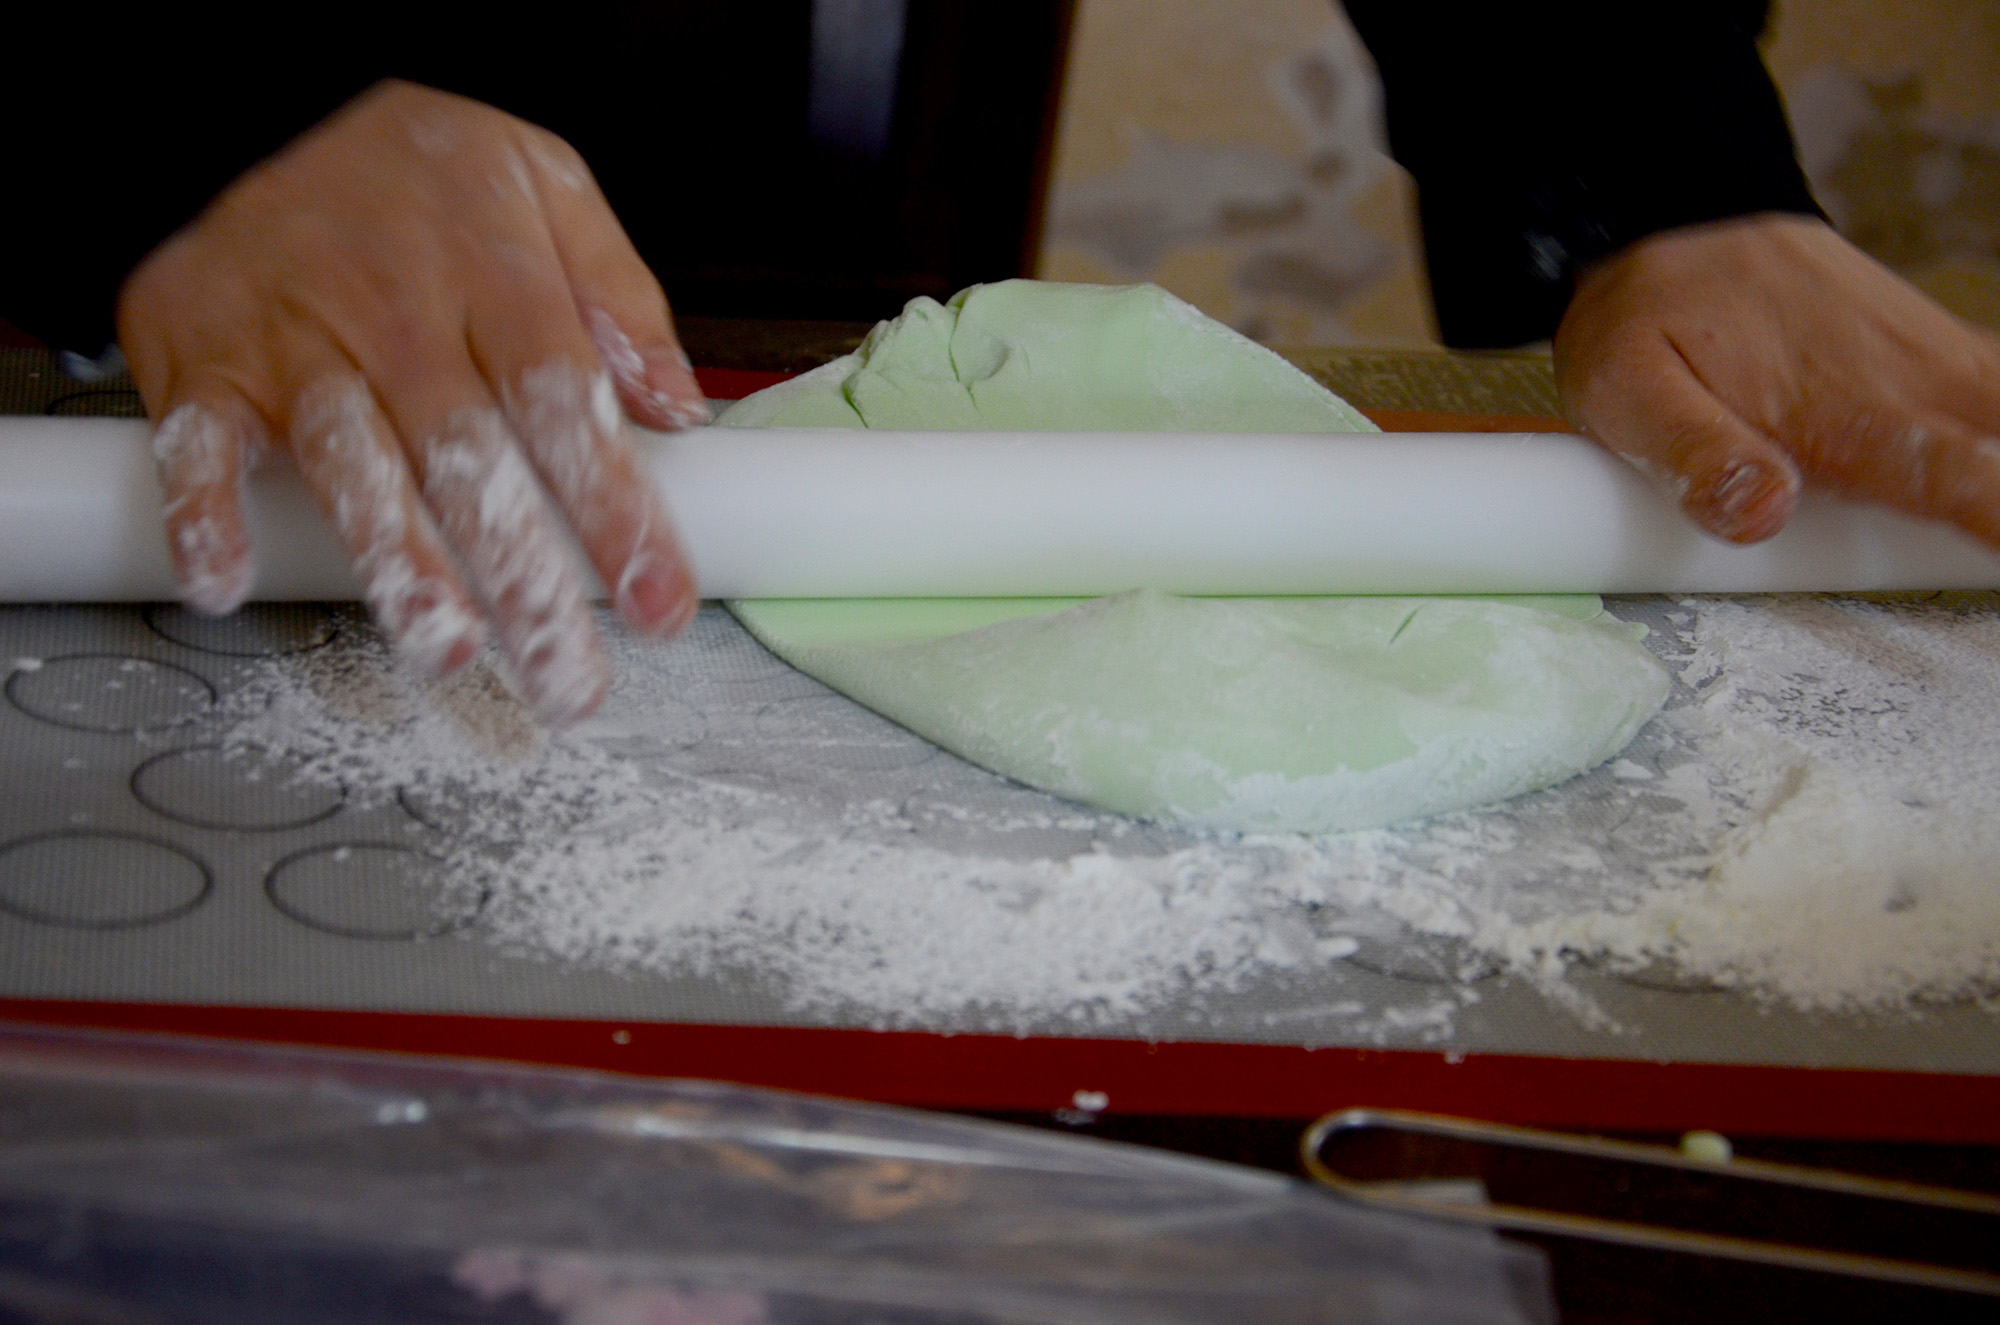 Johaina rolls her rollingpin over freshly made dough for a cake.